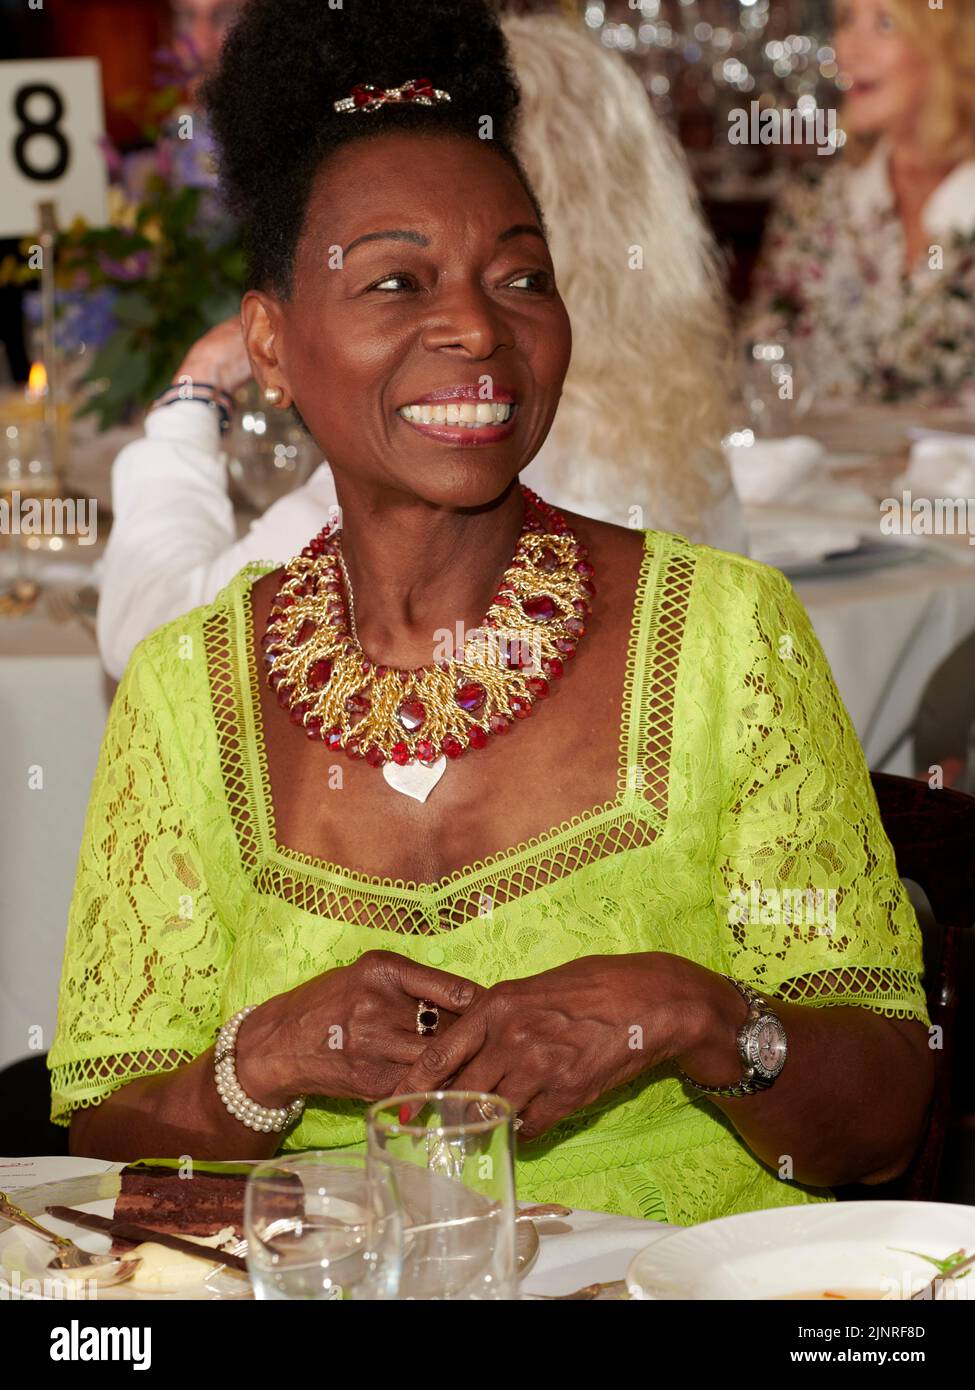 Floella Benjamin to Become Member of House of Lords |